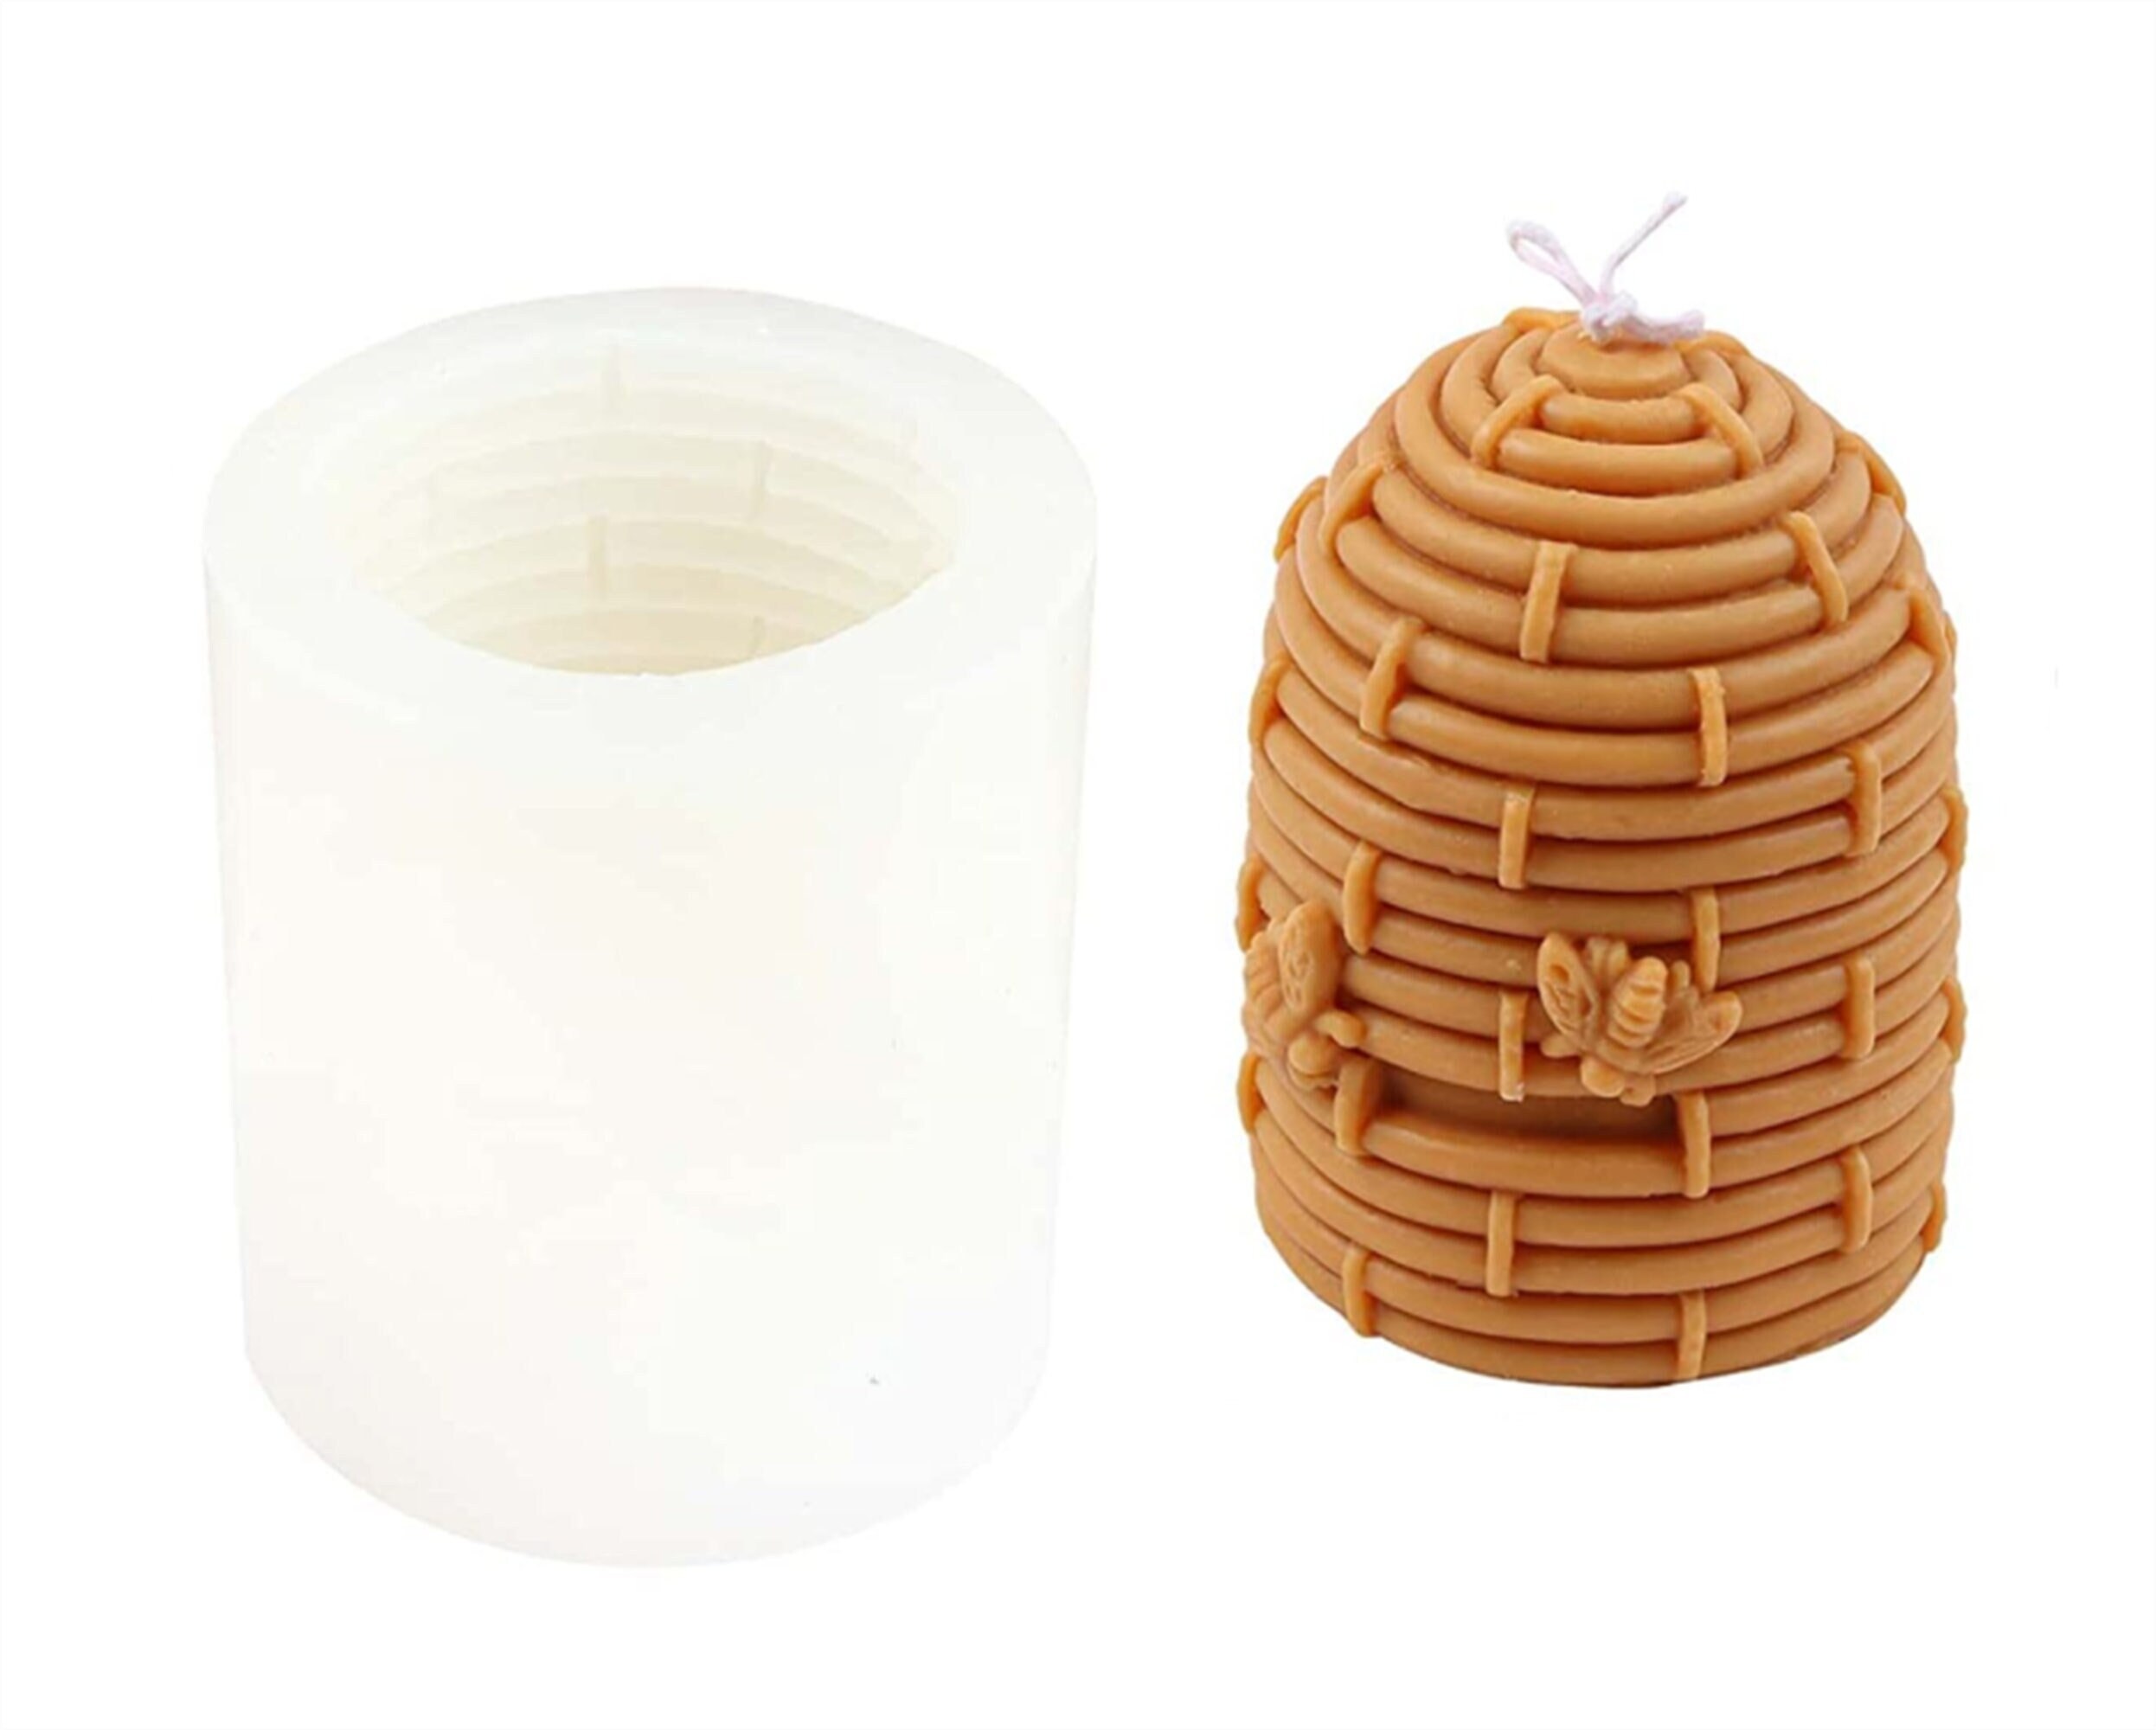 Taloyer Silicone Honeycomb Candle Mold, 3D Homemade Beeswax Candle Mould,  Beehive Silicone Mold for Candle Making Supplies